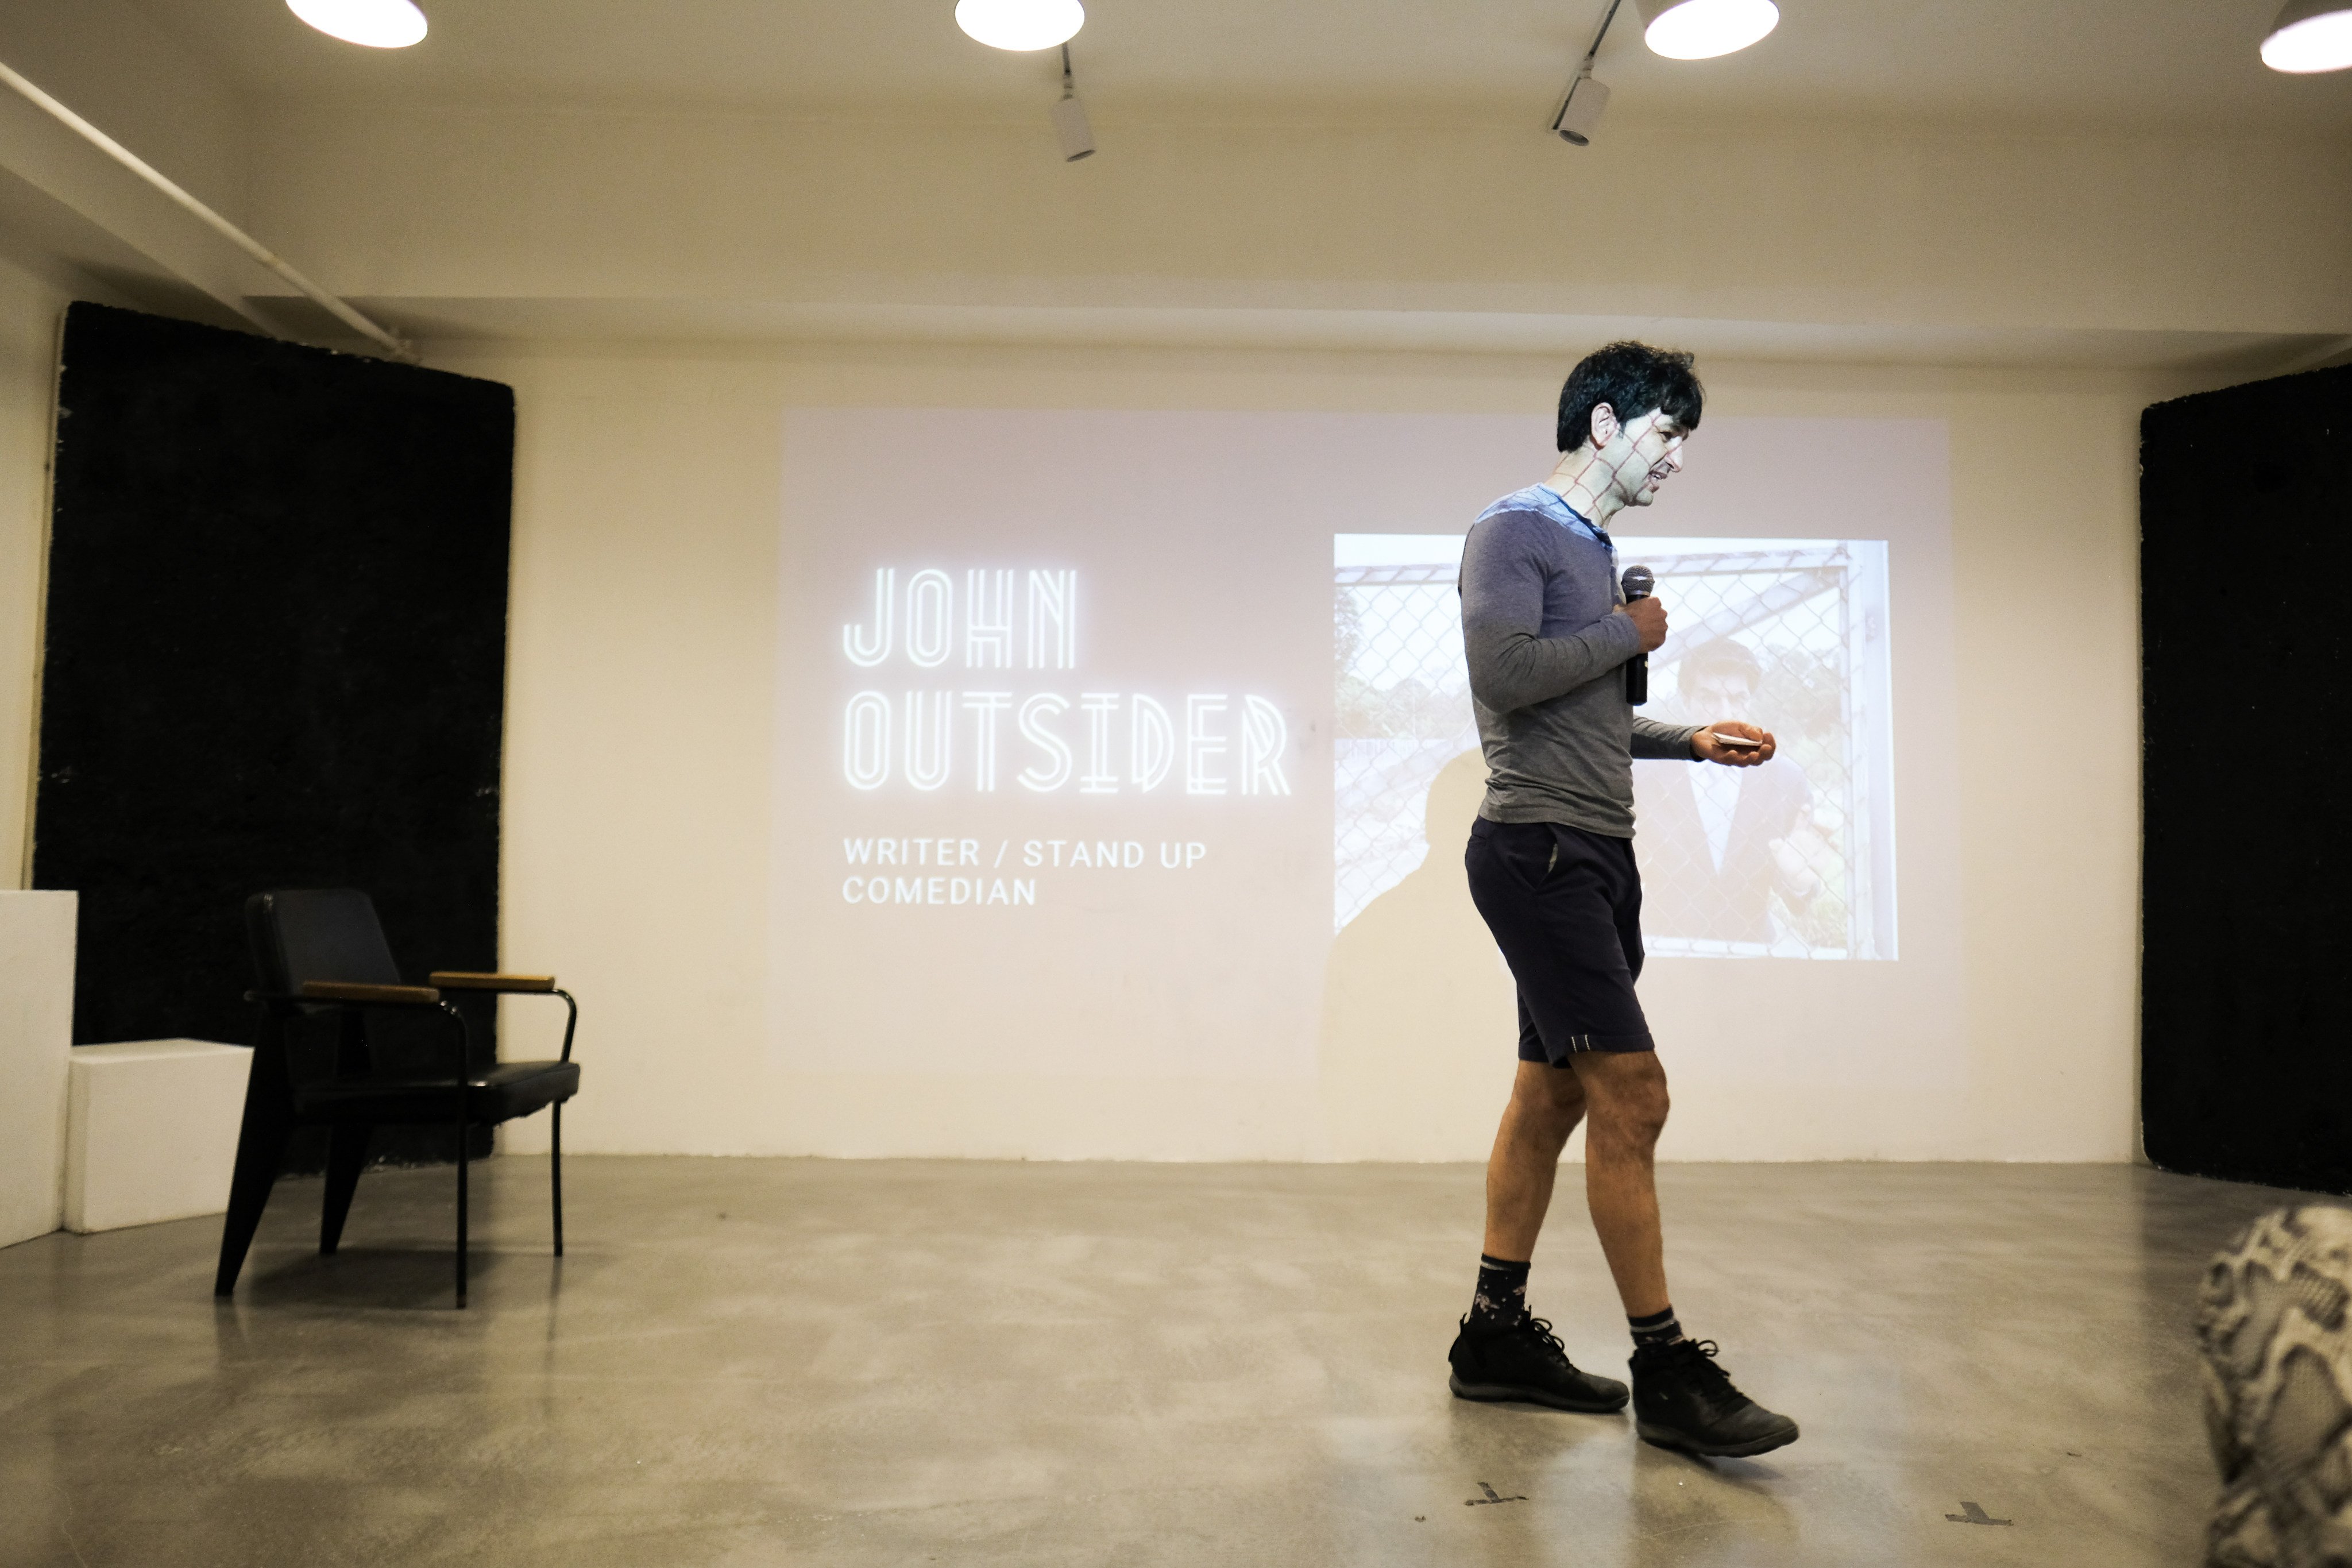 Misplaced Words Of A Displaced Man is a collection of poems by asylum seeker John Outsider that will be launched at open mic poetry night held as part of Refugee Week Hong Kong. Photo: Phoebe So

